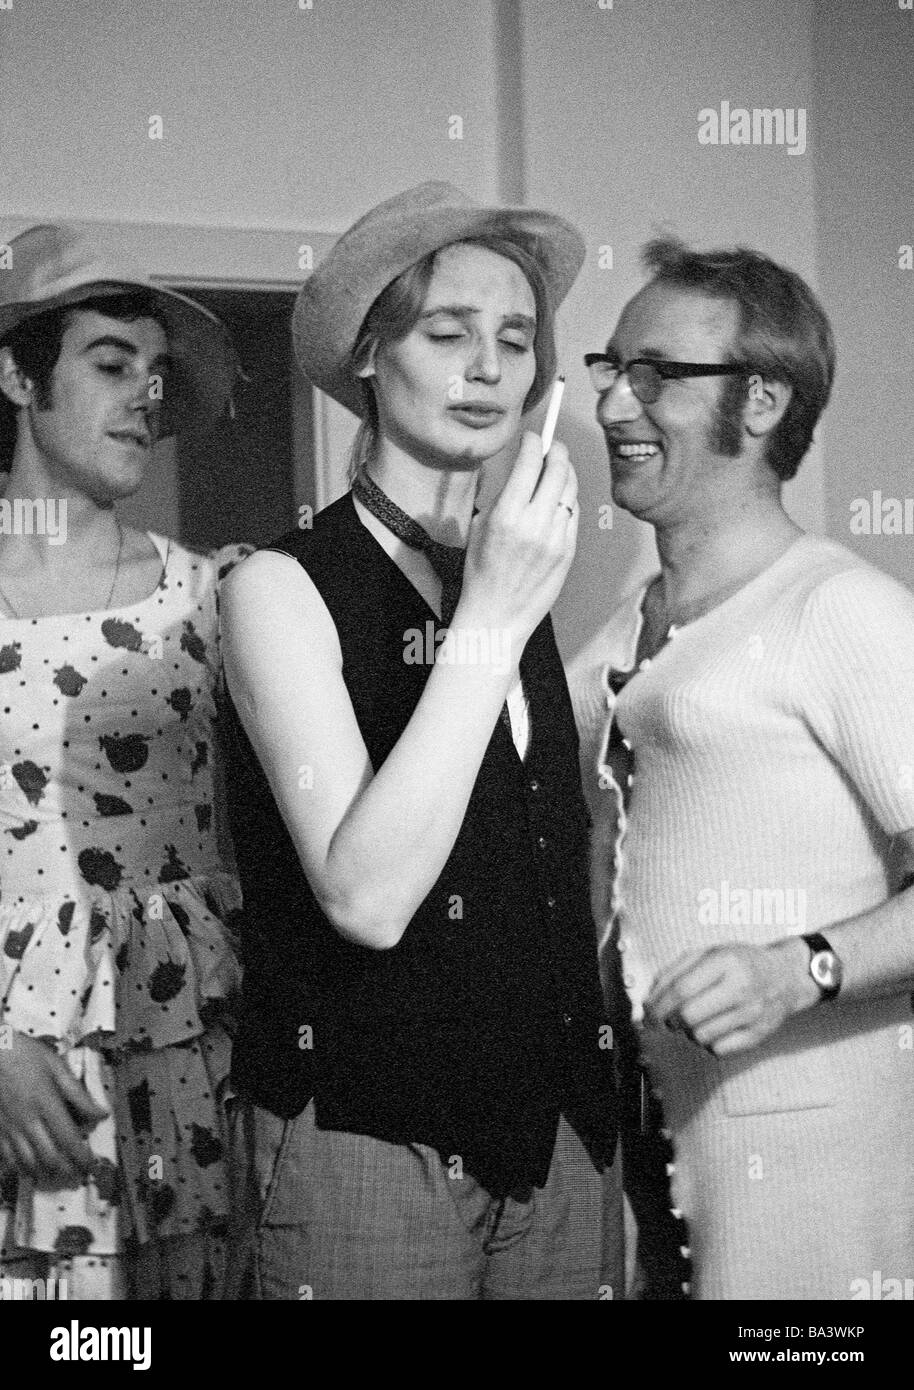 Seventies, black and white photo, humour, people, carnival, fancy-dress party, young woman disguised as a man holding a cigarette, two young men in womens clothing, ruched dress, aged 20 to 30 years, Margret, Werner Stock Photo